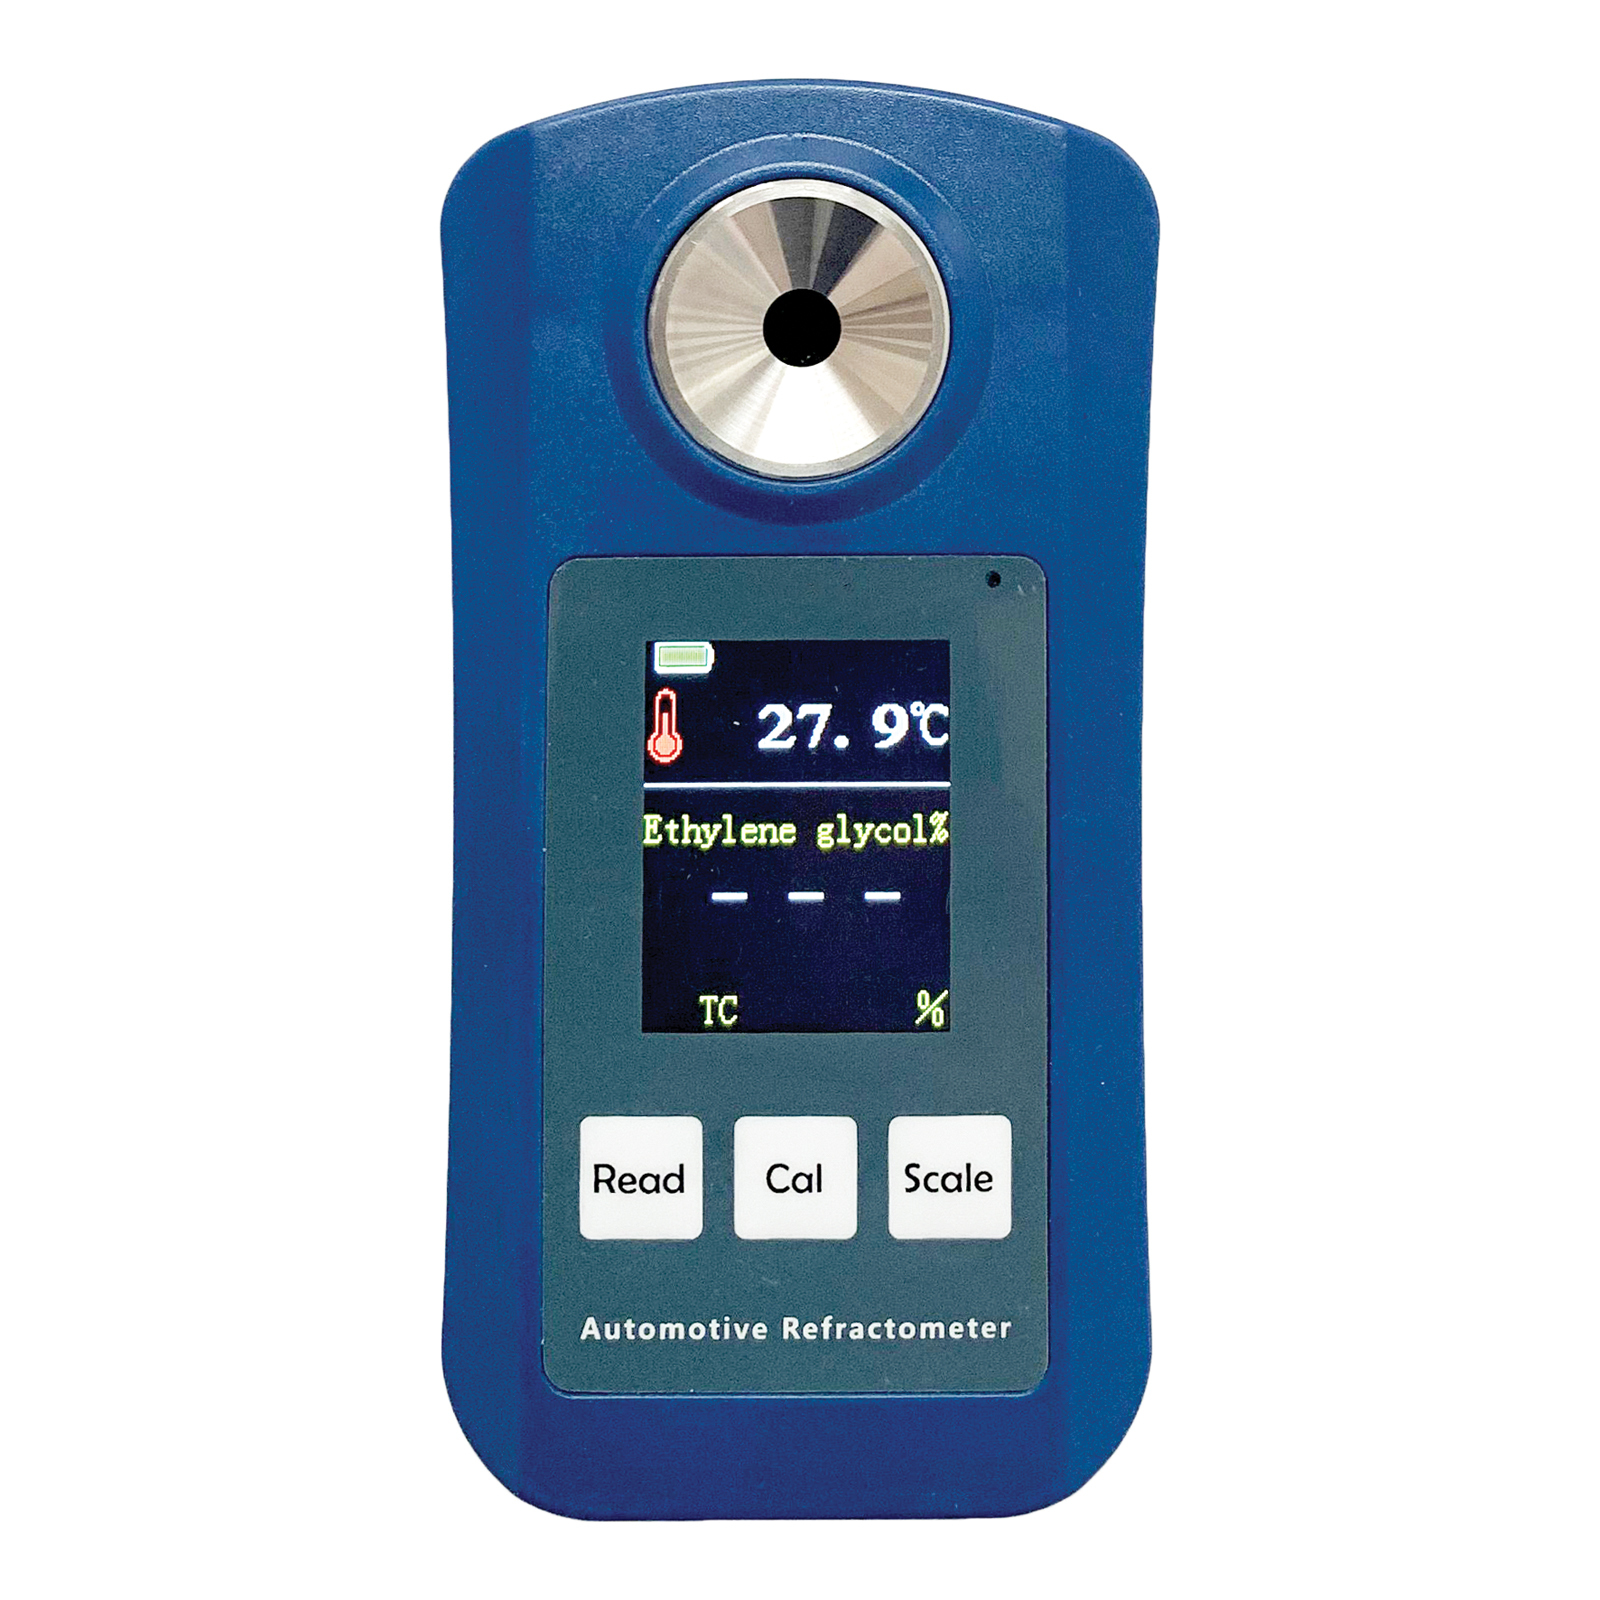 Black Antifreeze Refractometer Coolant Tester For Checking Freezing Point,  Concentration Of Ethylene Glycol, Battery Acid Condition, Freezing Point Me